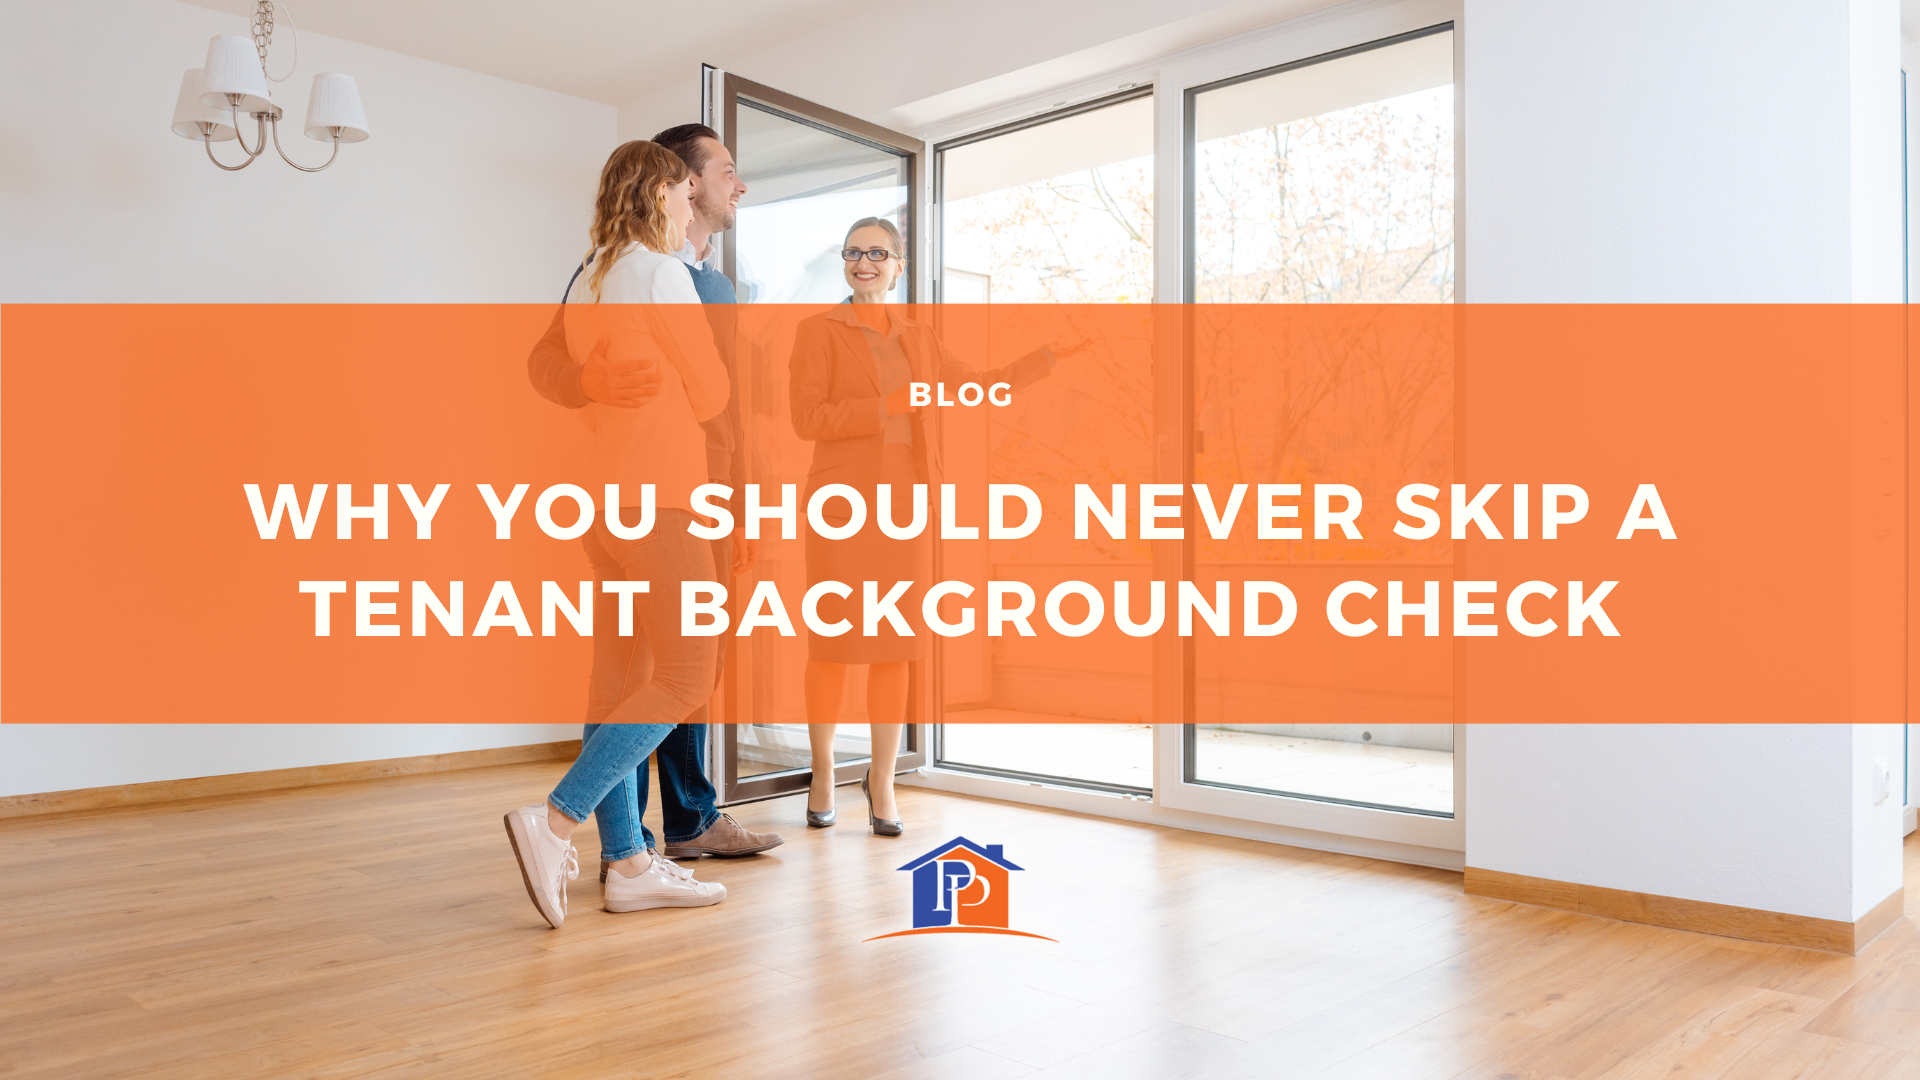 Why You Should Never Skip a Tenant Background Check